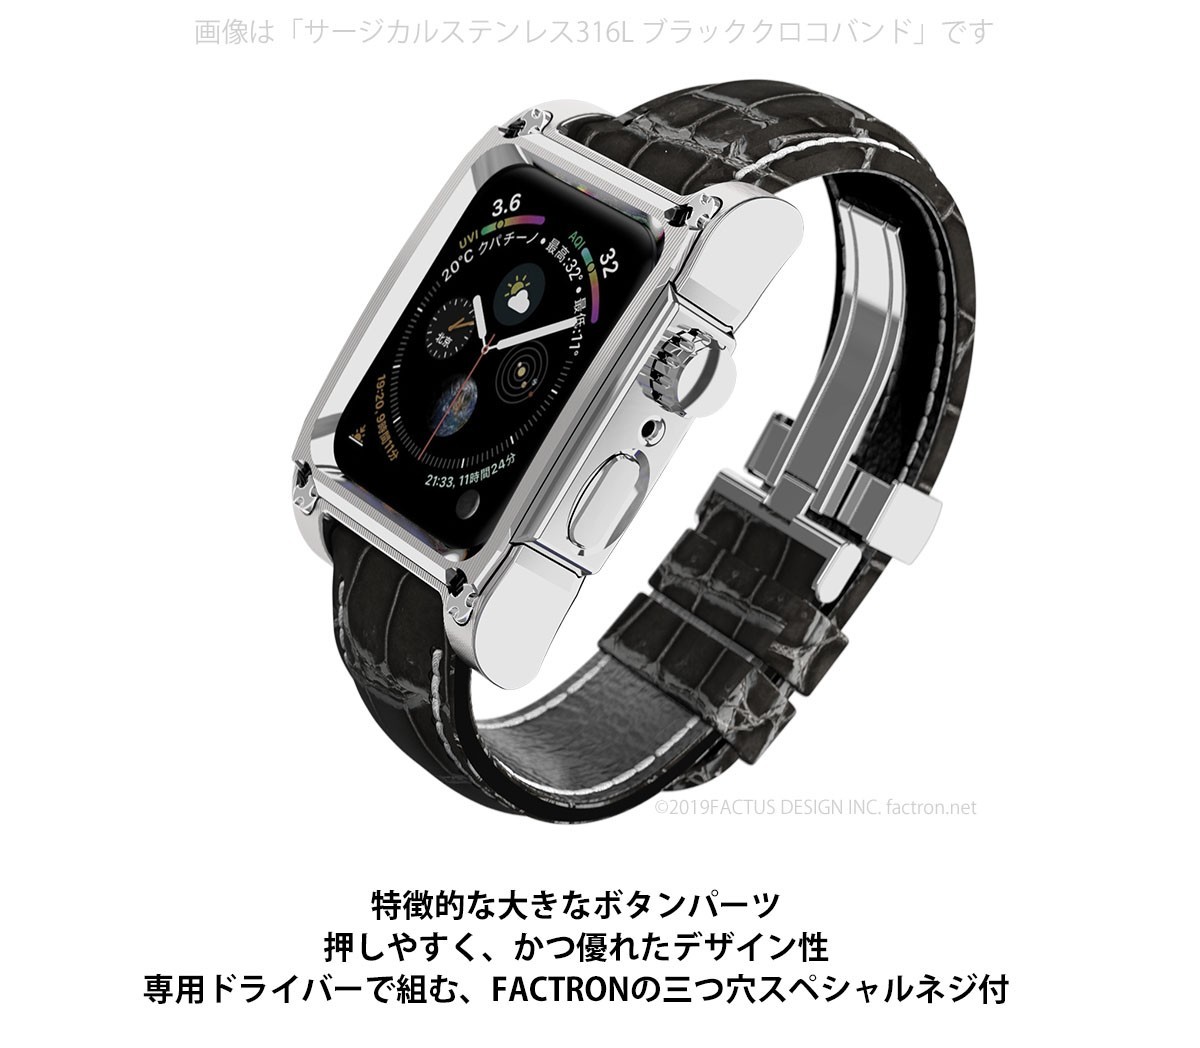  Apple watch 4&amp;5 for Novel for AppleWatch4 titanium case black black ko band Series4&amp;5 40mm exclusive use FA-W-031